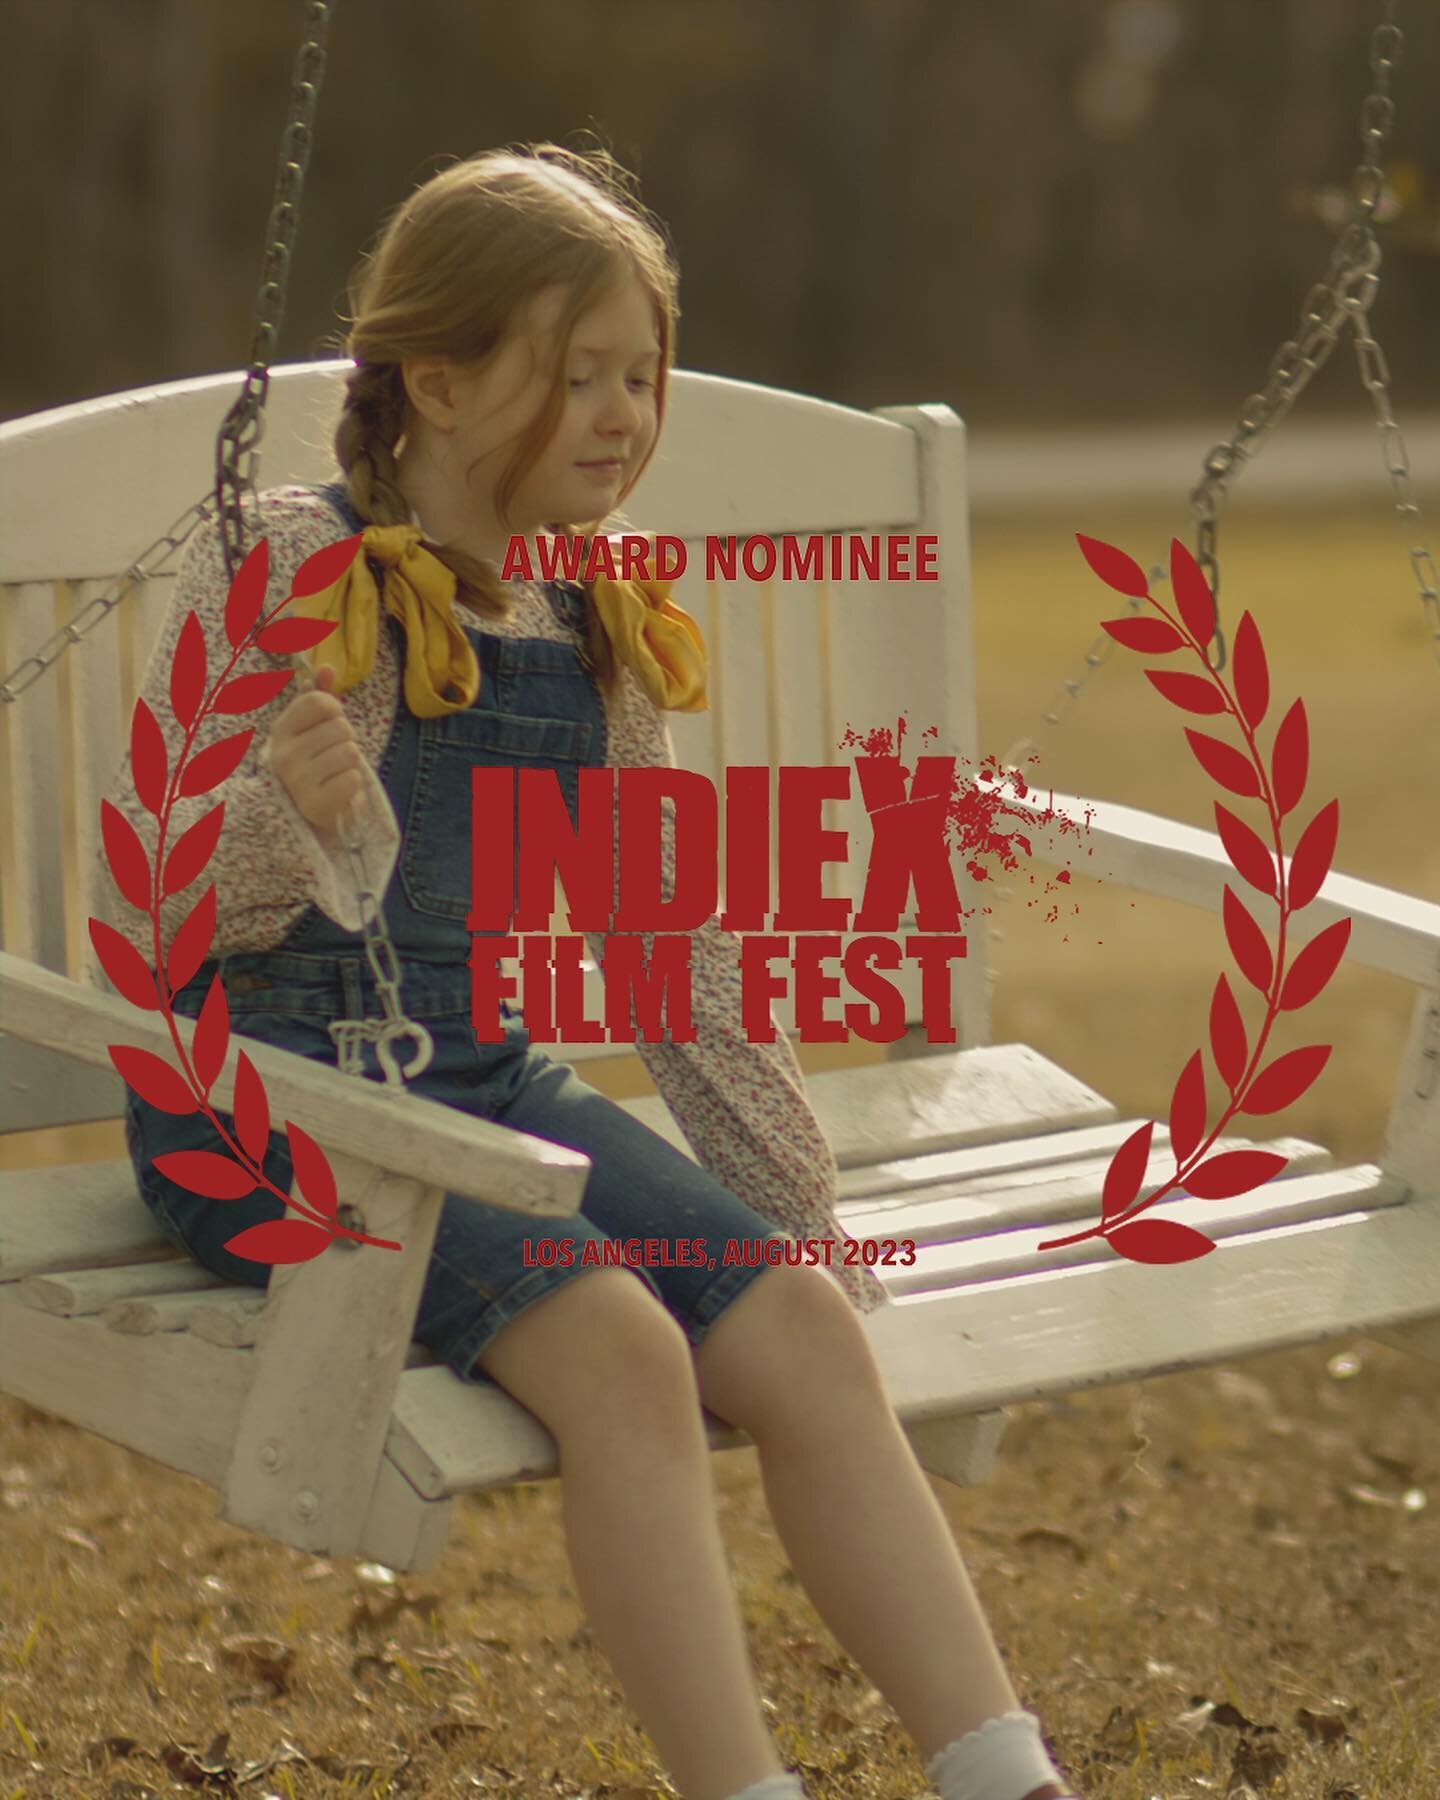 we&rsquo;re so thrilled with all of the love! daisies has been honored as an award nominee, honorable mention, and official selection for @indiexfest.

we can&rsquo;t thank you enough for your ongoing support! 💛🌼